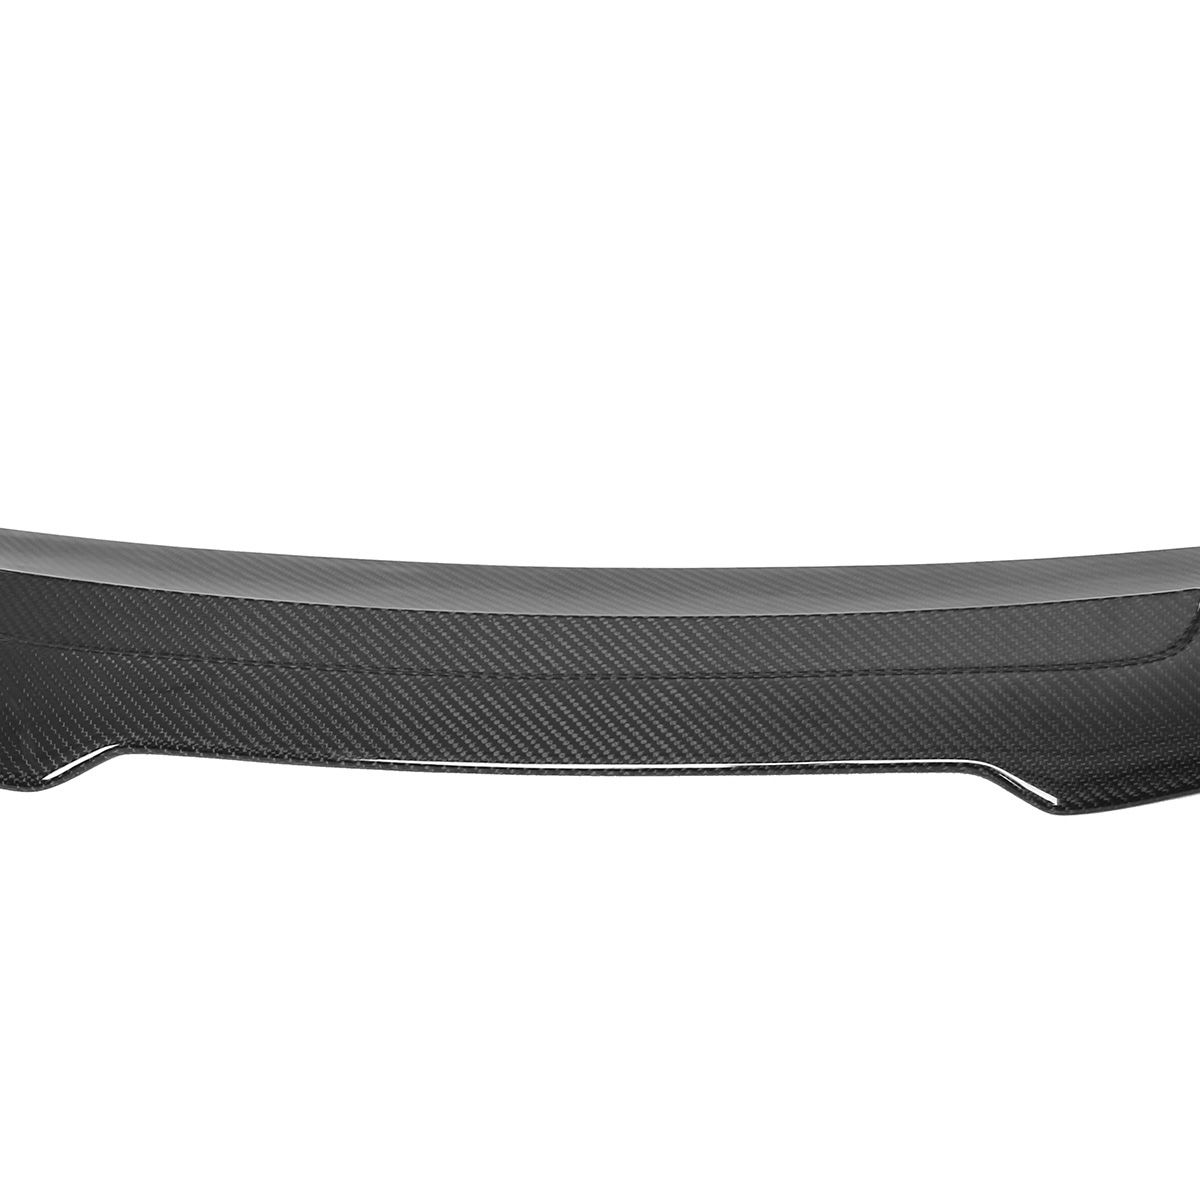 Carbon-Fiber-High-Kick-PSM-Style-Car-Rear-Trunk-Spoiler-Wing-For-BMW-F33-F83-M4-2DR-14-18-1555420